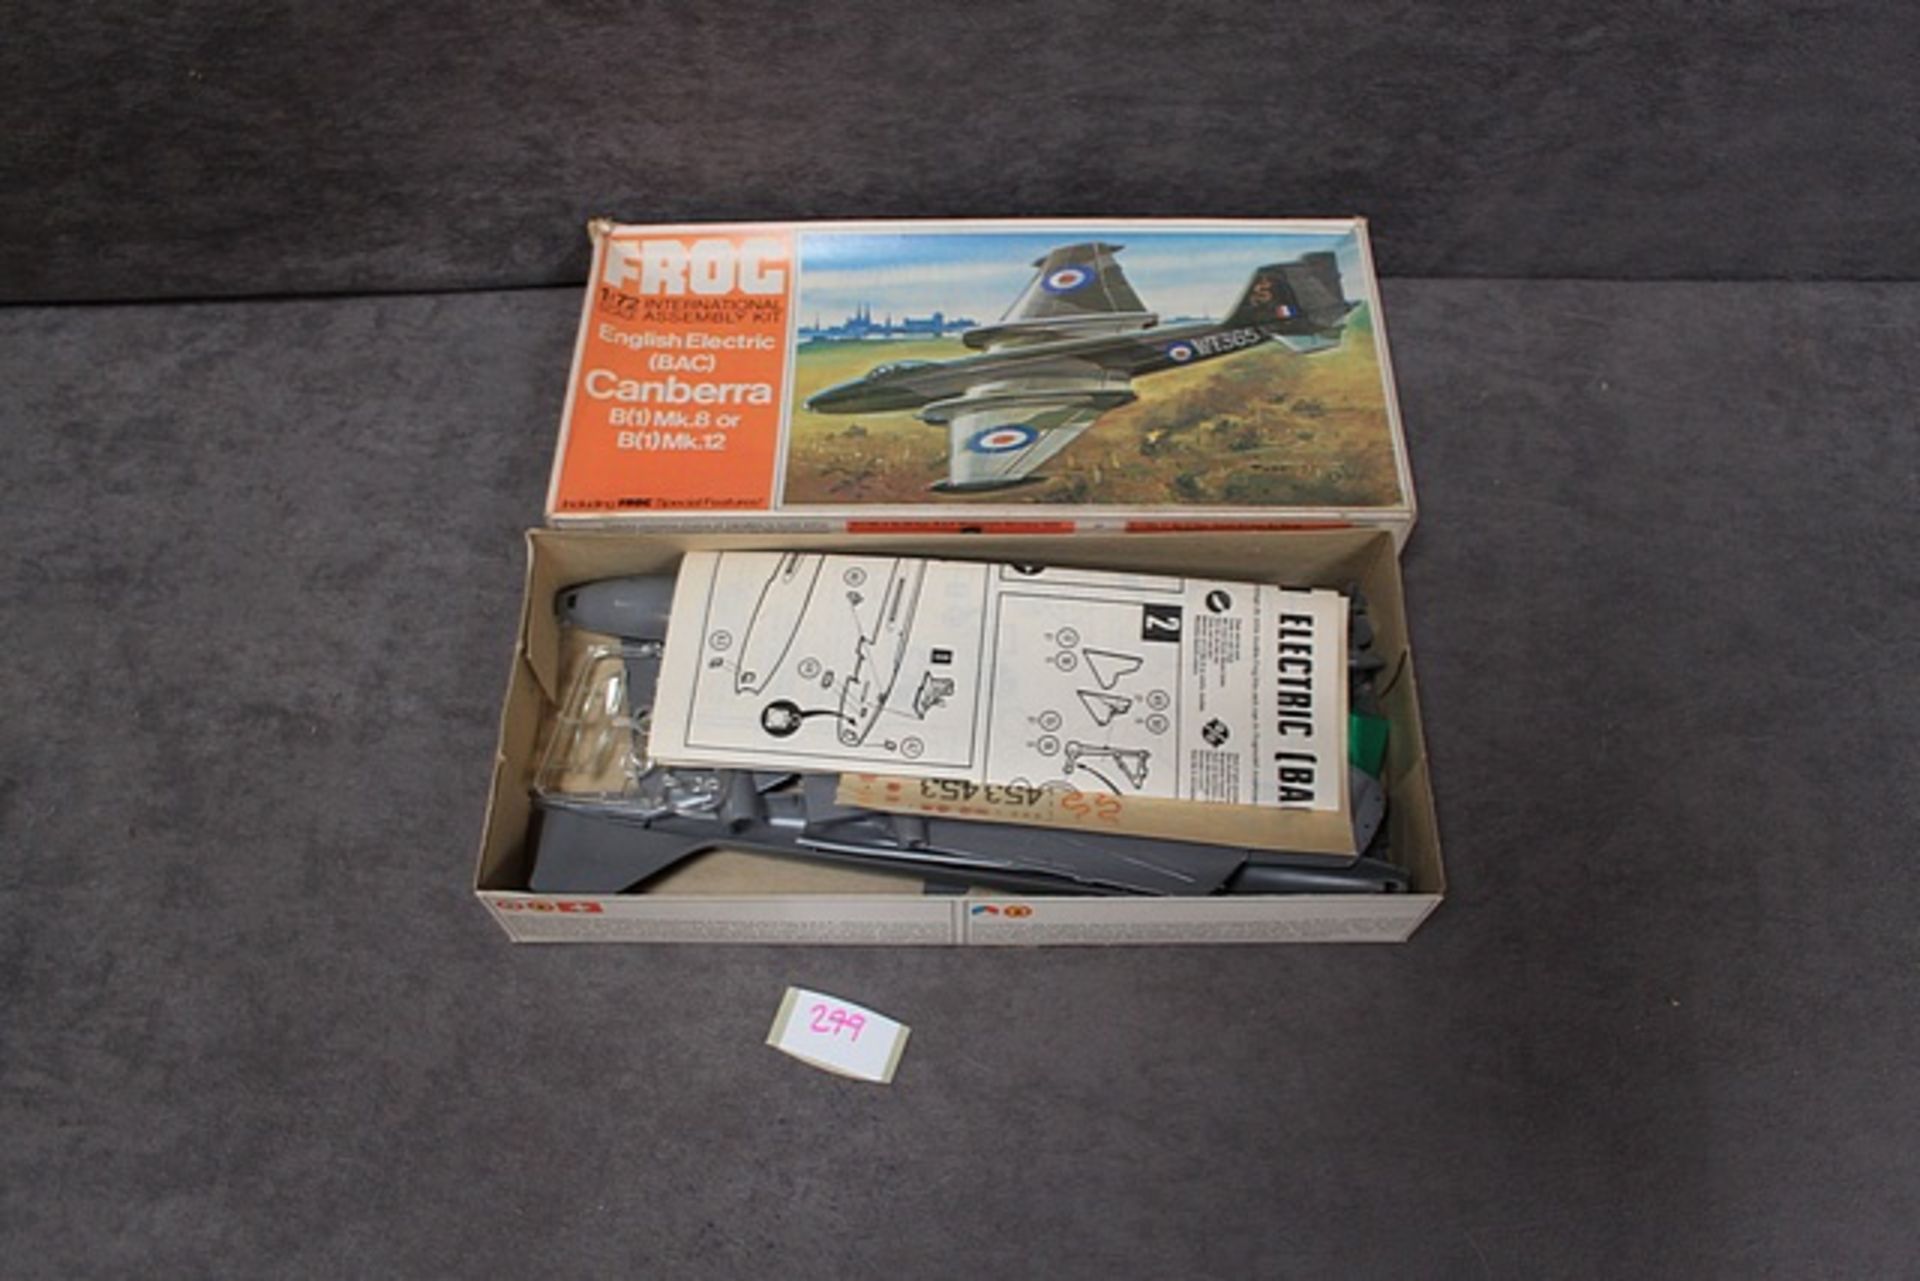 Frog 1:72 scale #F203 English Electric (BAC) Canberra with instructions in box